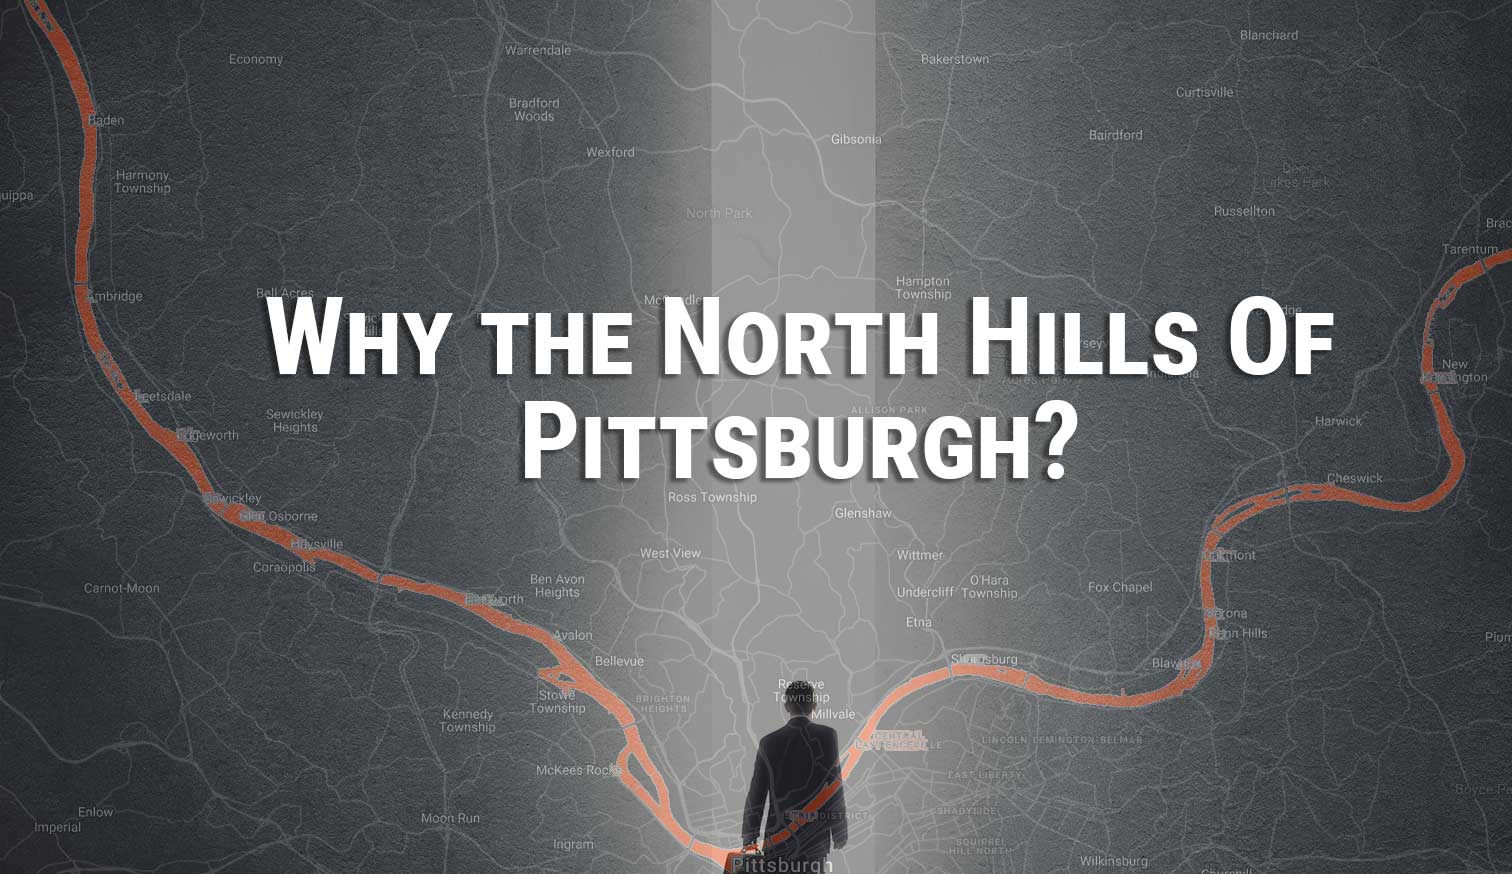 Why North Hills of Pittsburgh Graphic